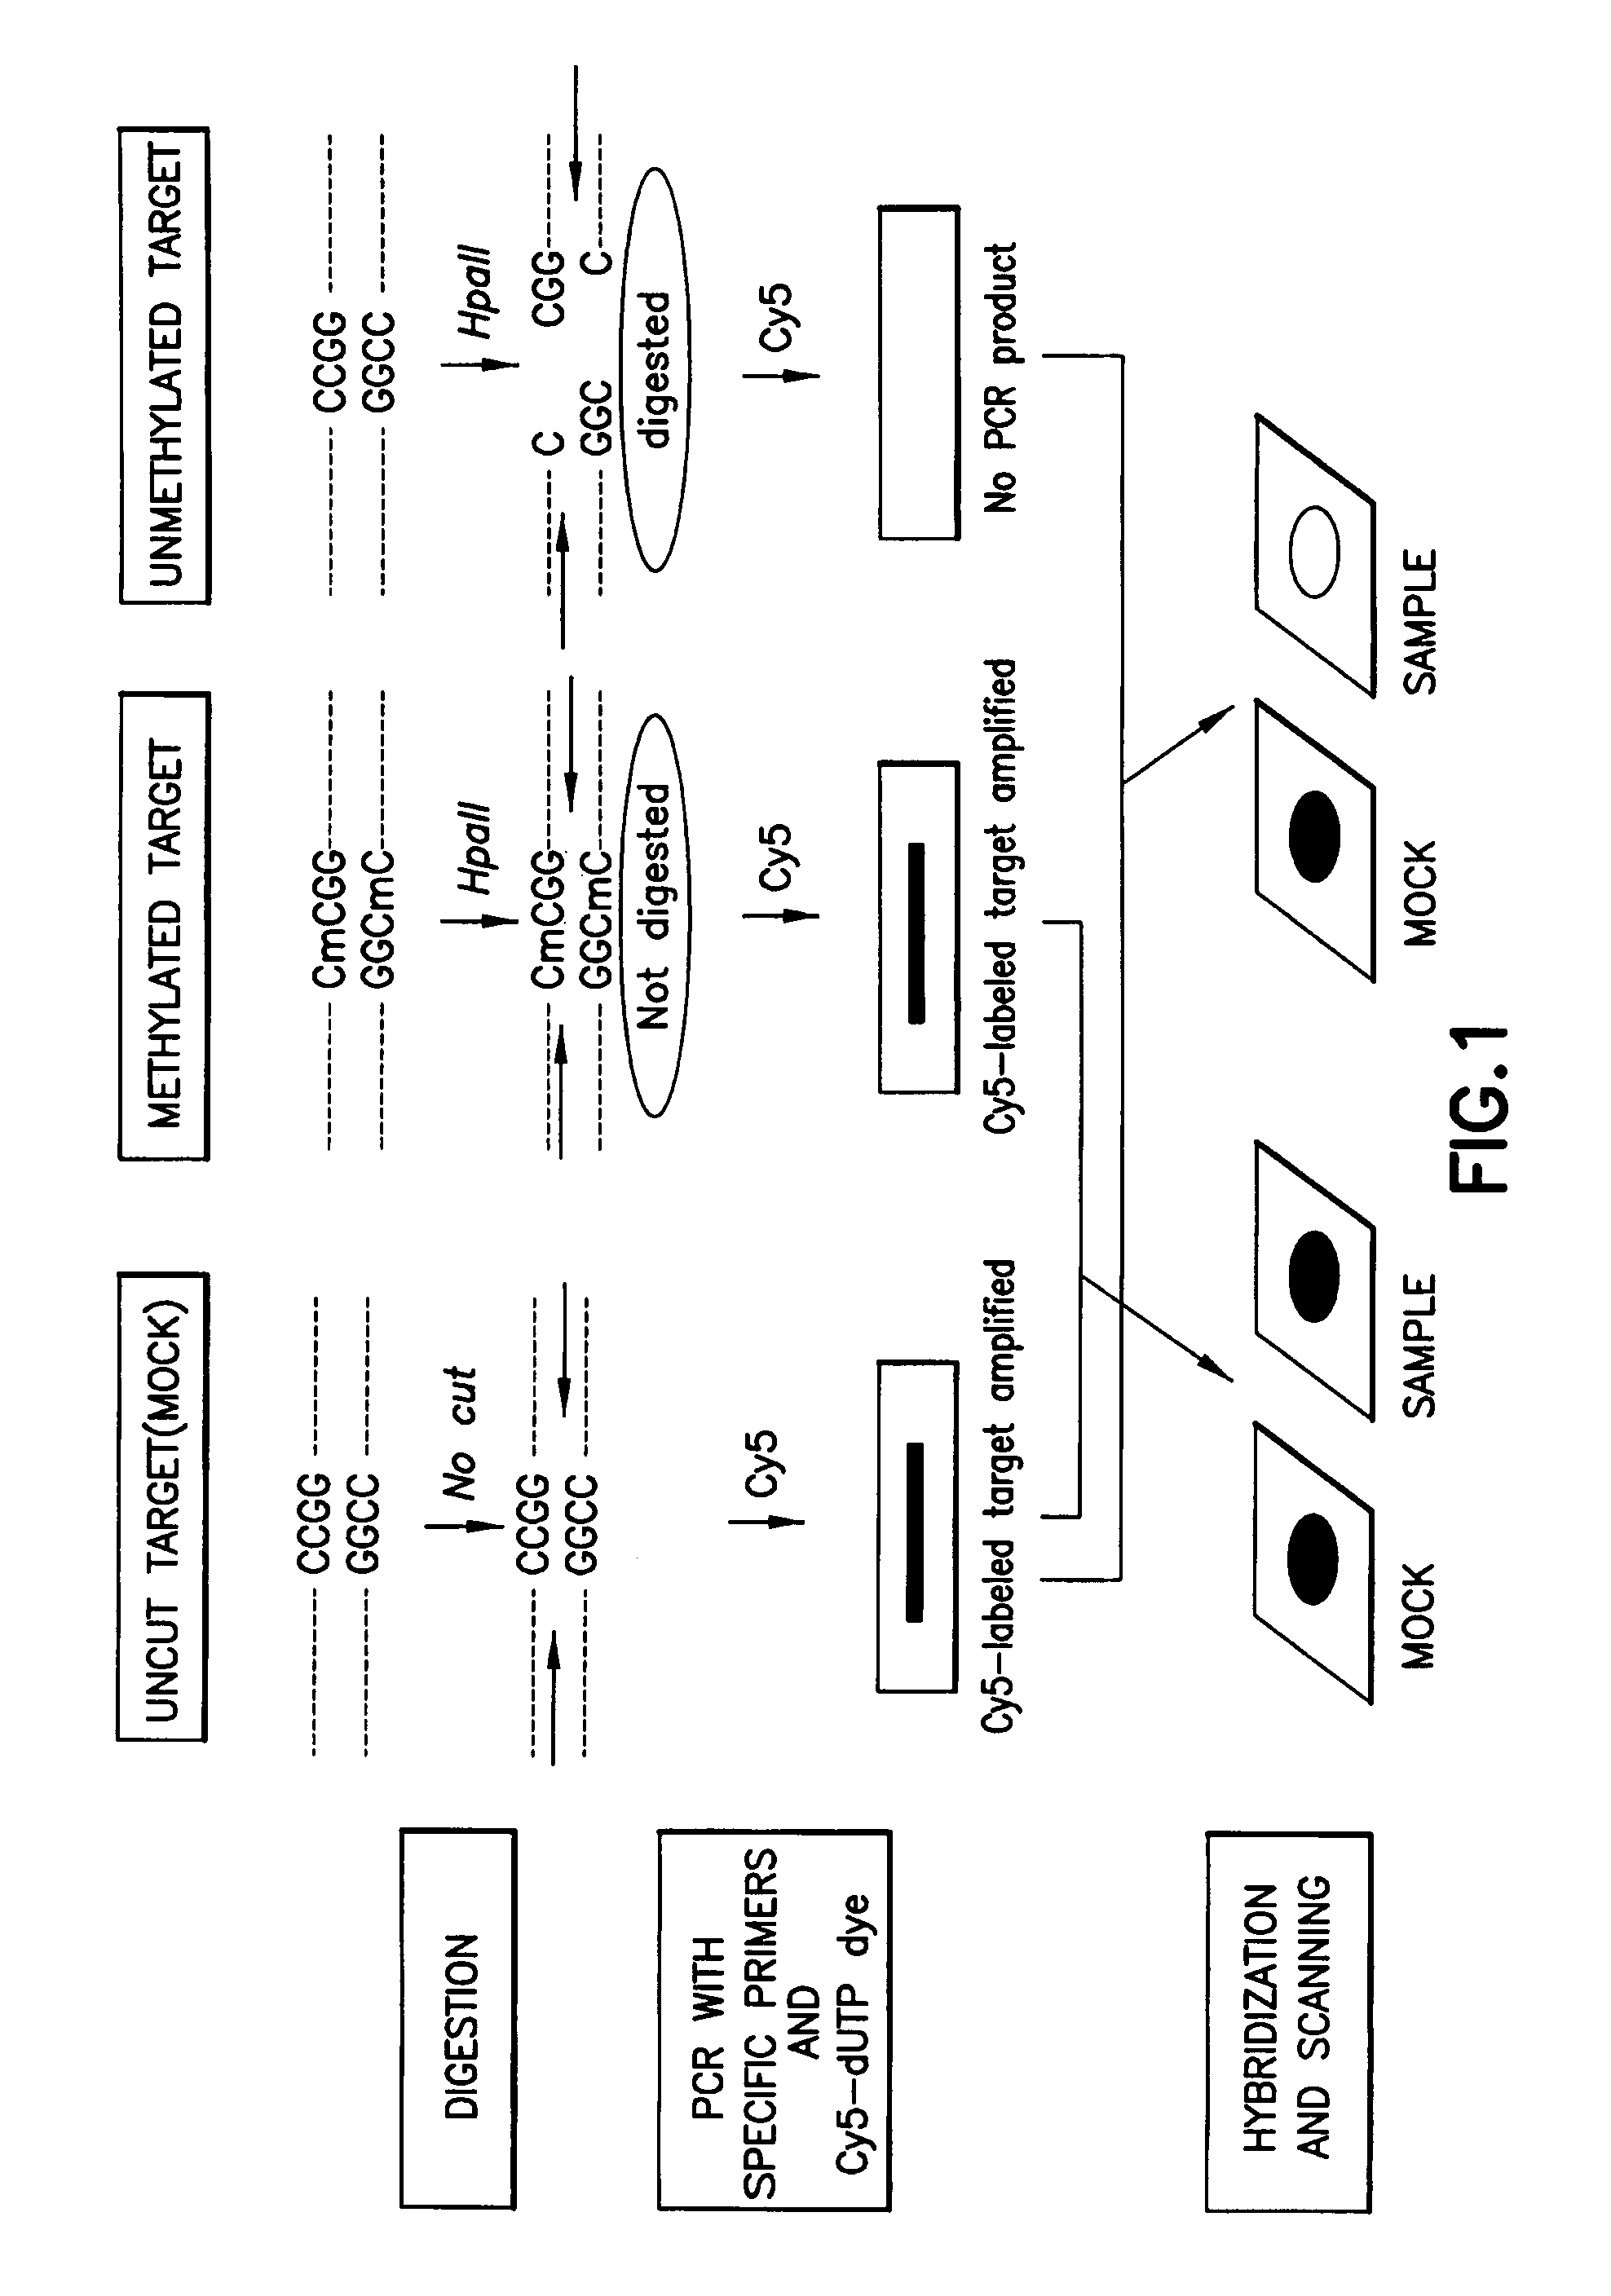 Method for detecting methylation of promoter using restriction enzyme and DNA chip